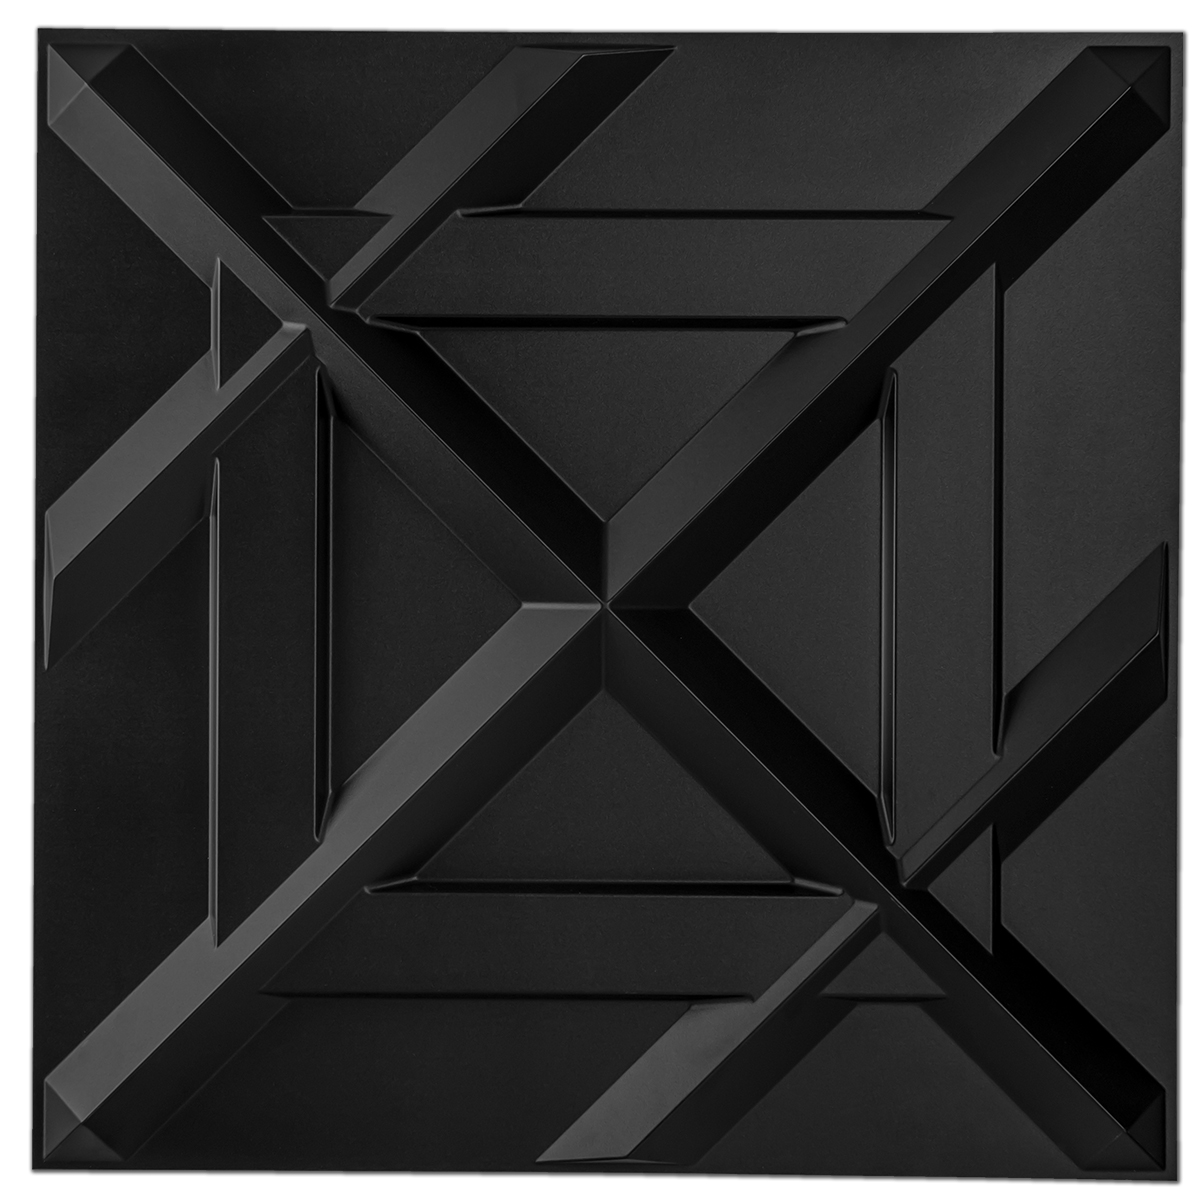 A10054BK -Art3d PVC 3D Wall Panel, Decorative Wall Tile in Black 12-Pack 19.7